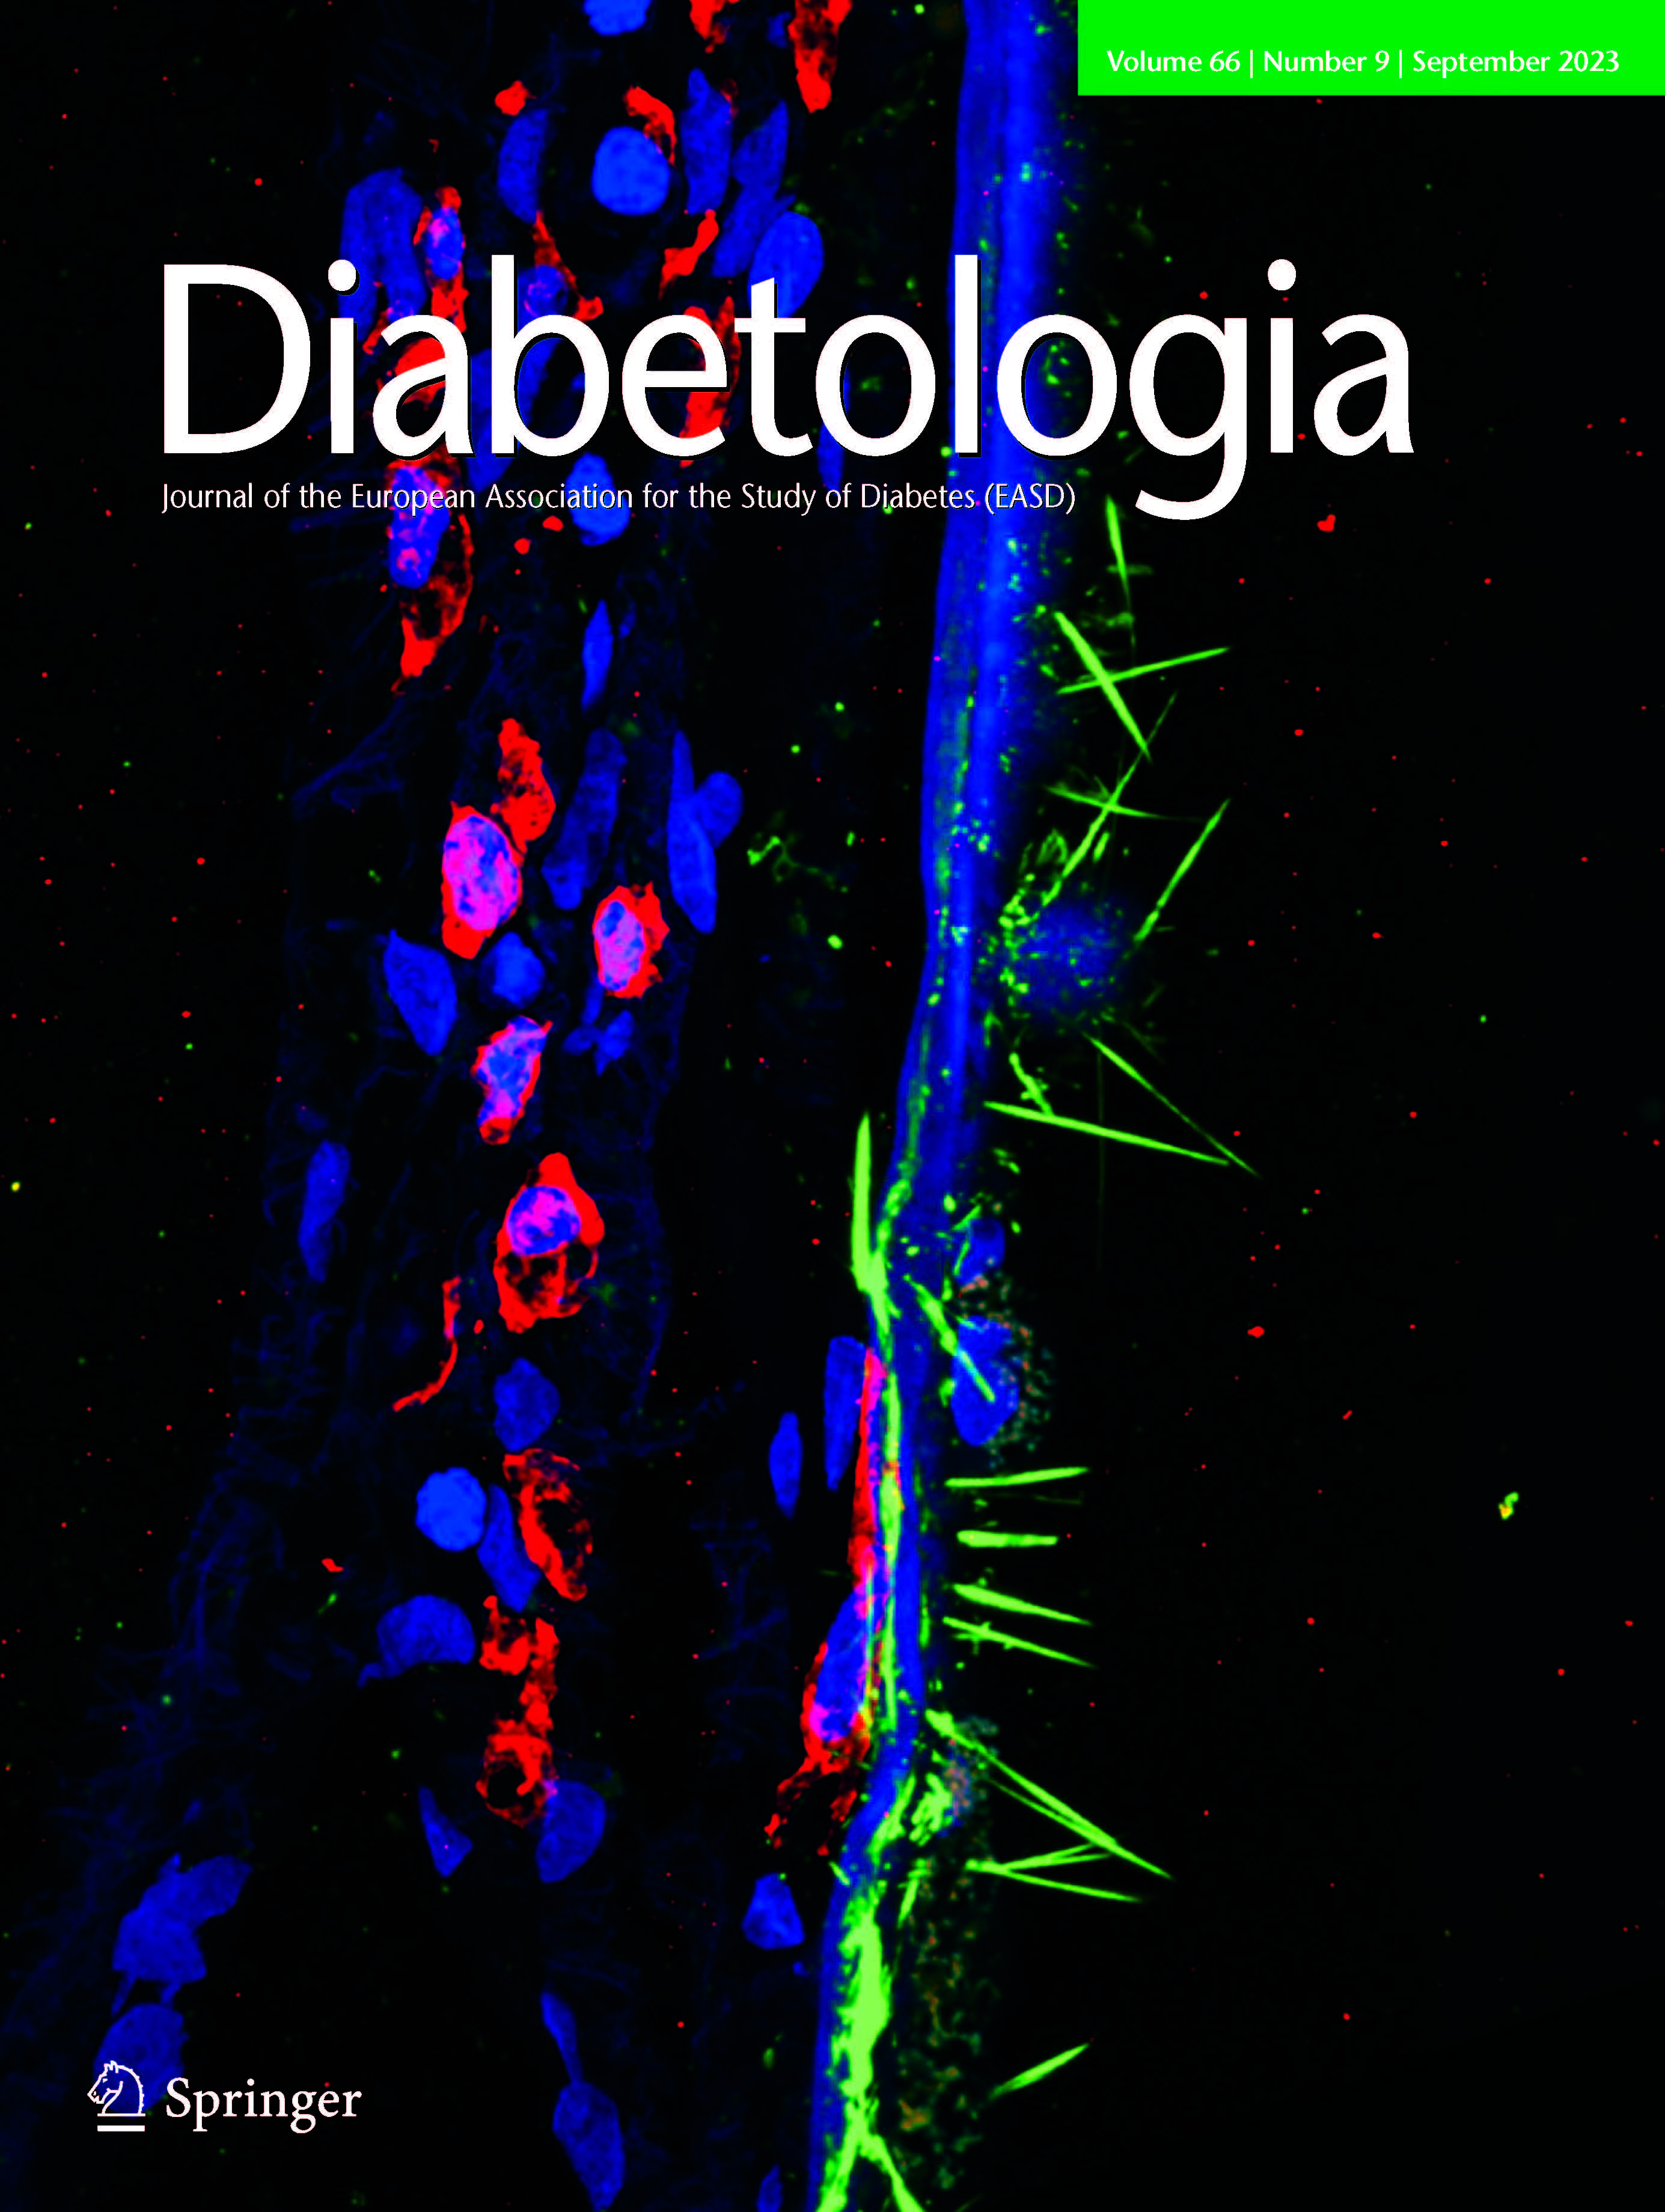 The September 2023 issue of the journal Diabetologia which features an image taken by MSU graduate student Tim Dorweiler.